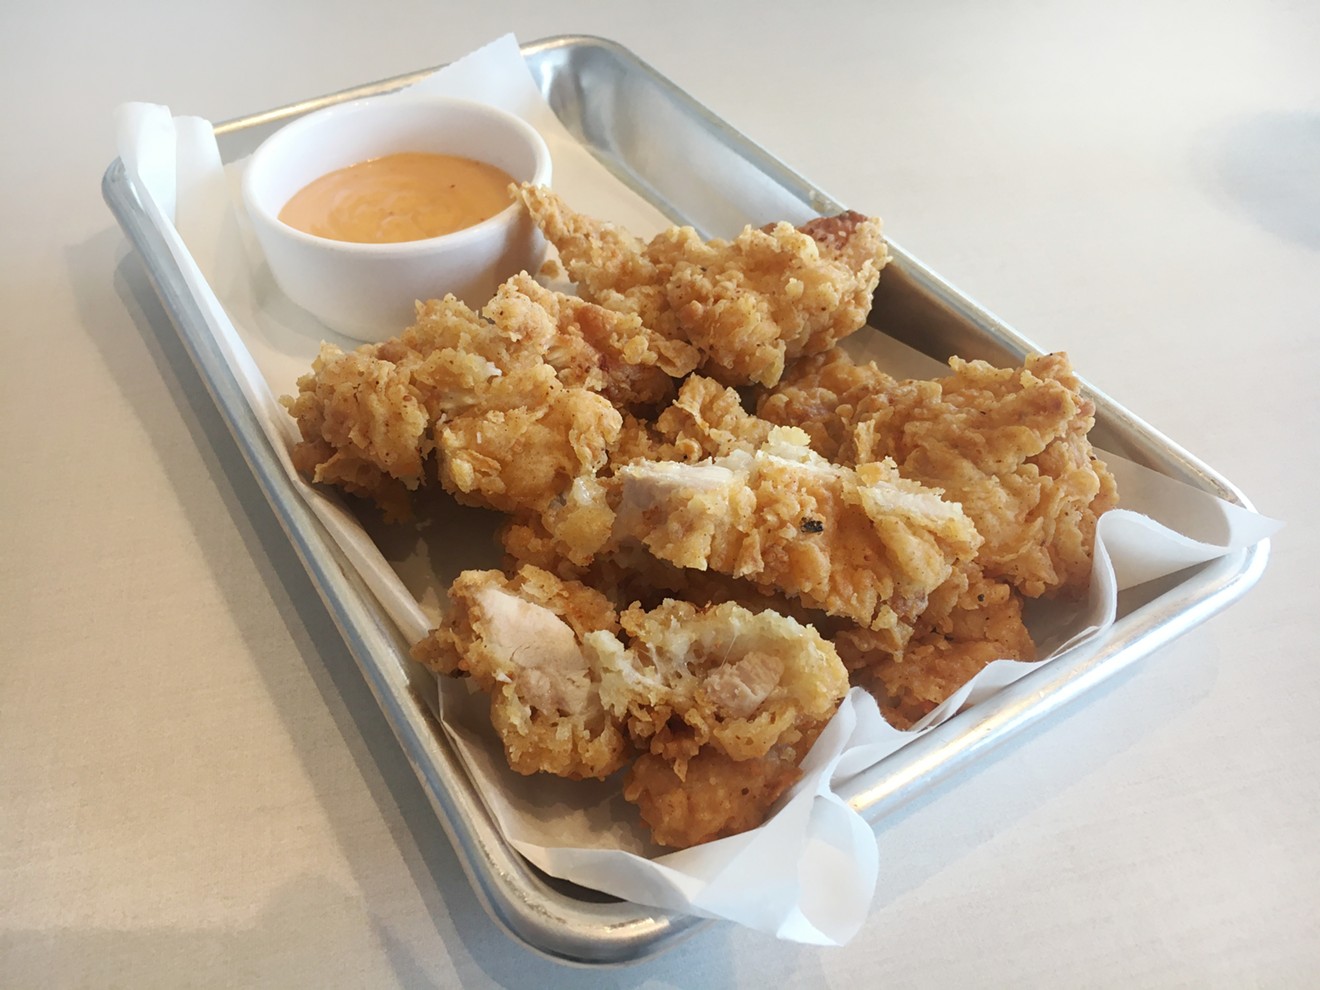 Thai-style fried chicken is new at Hey Bangkok.